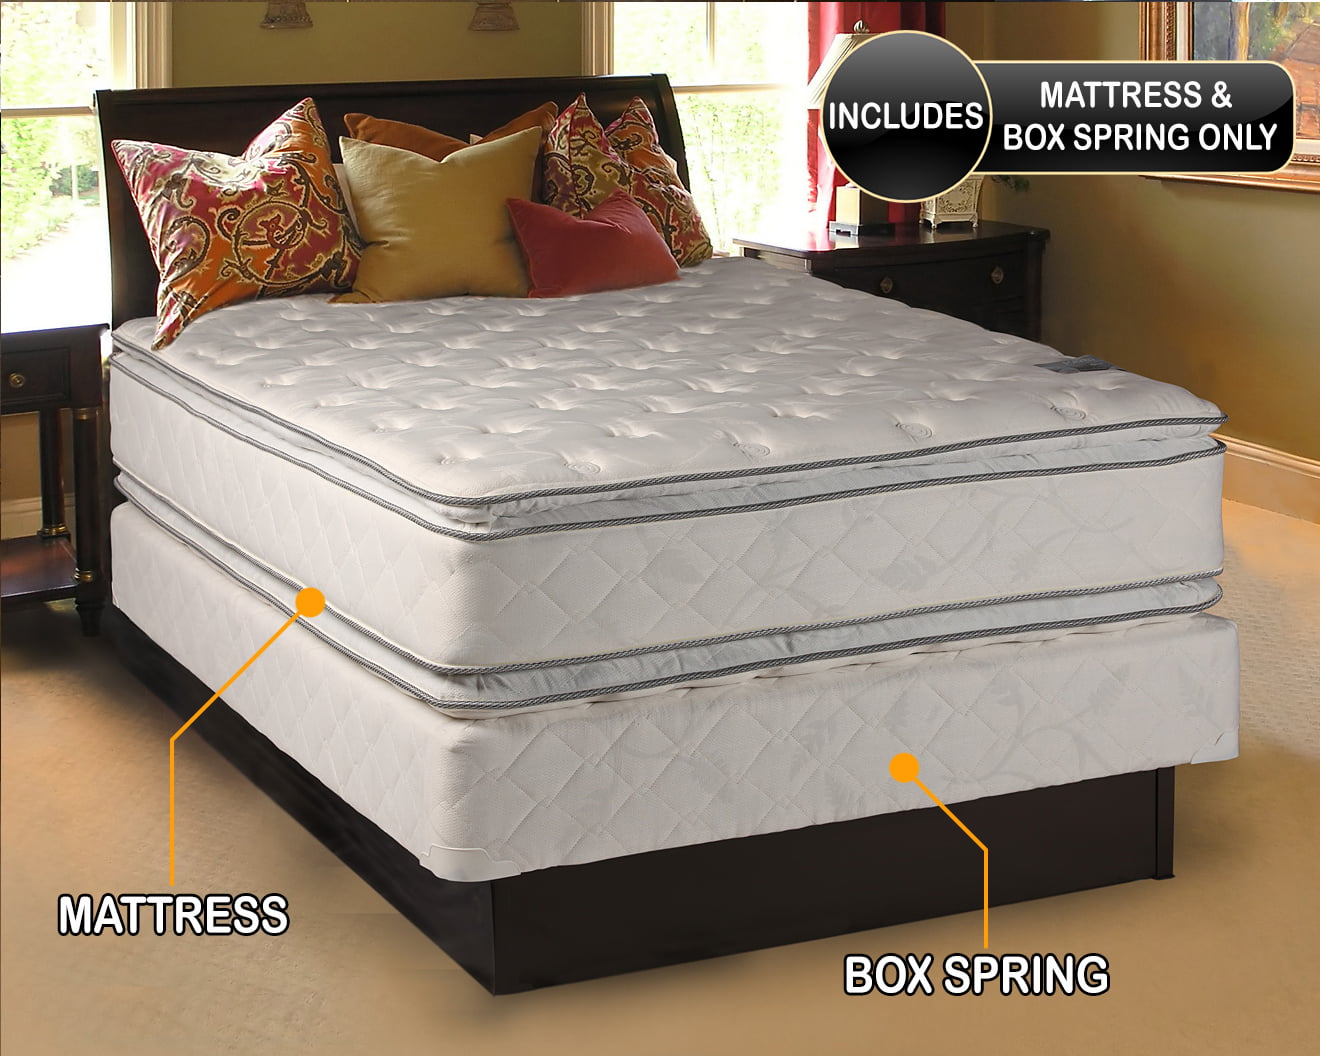 queen mattress and box spring in a box